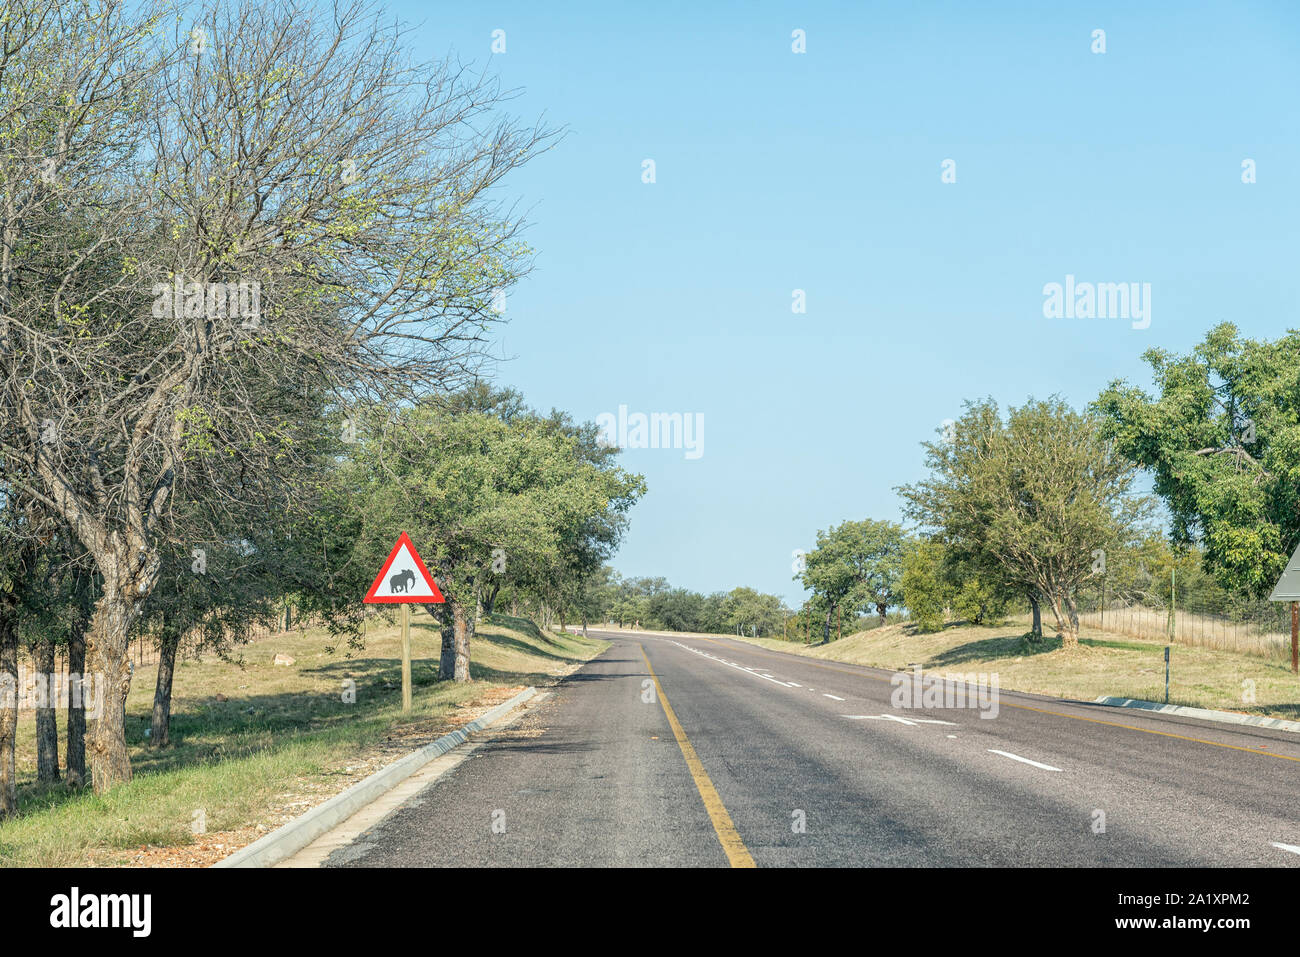 A road landscape on road R40 near Phalaborwa. An elephant warning sign is visible Stock Photo